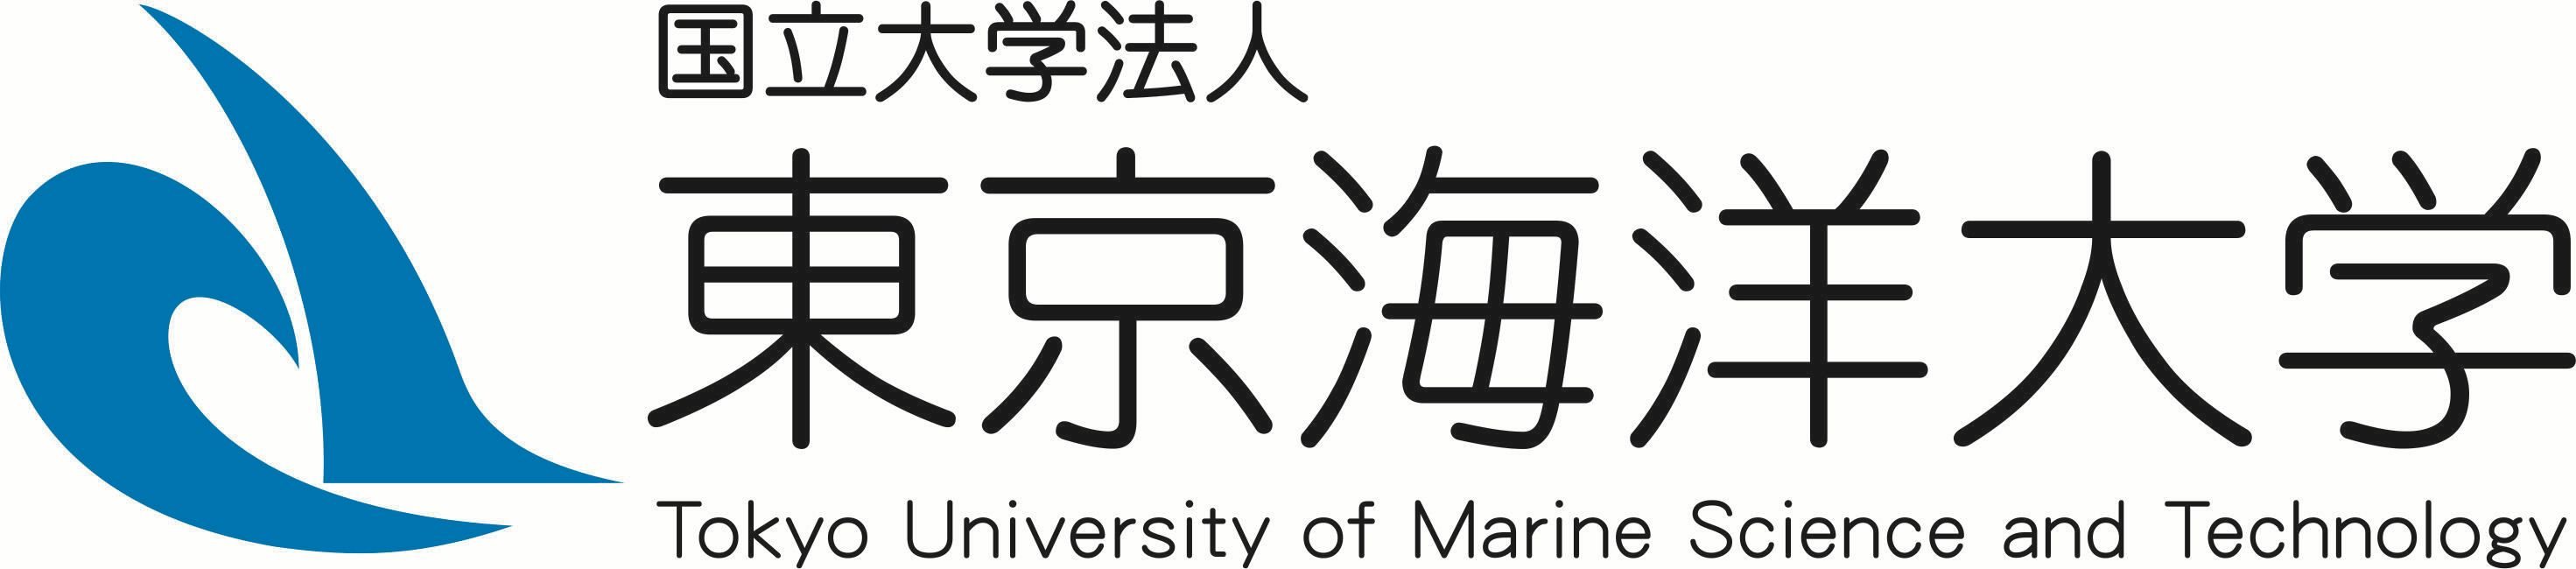 tokyo-university-of-marine-science-and-technology-31500962